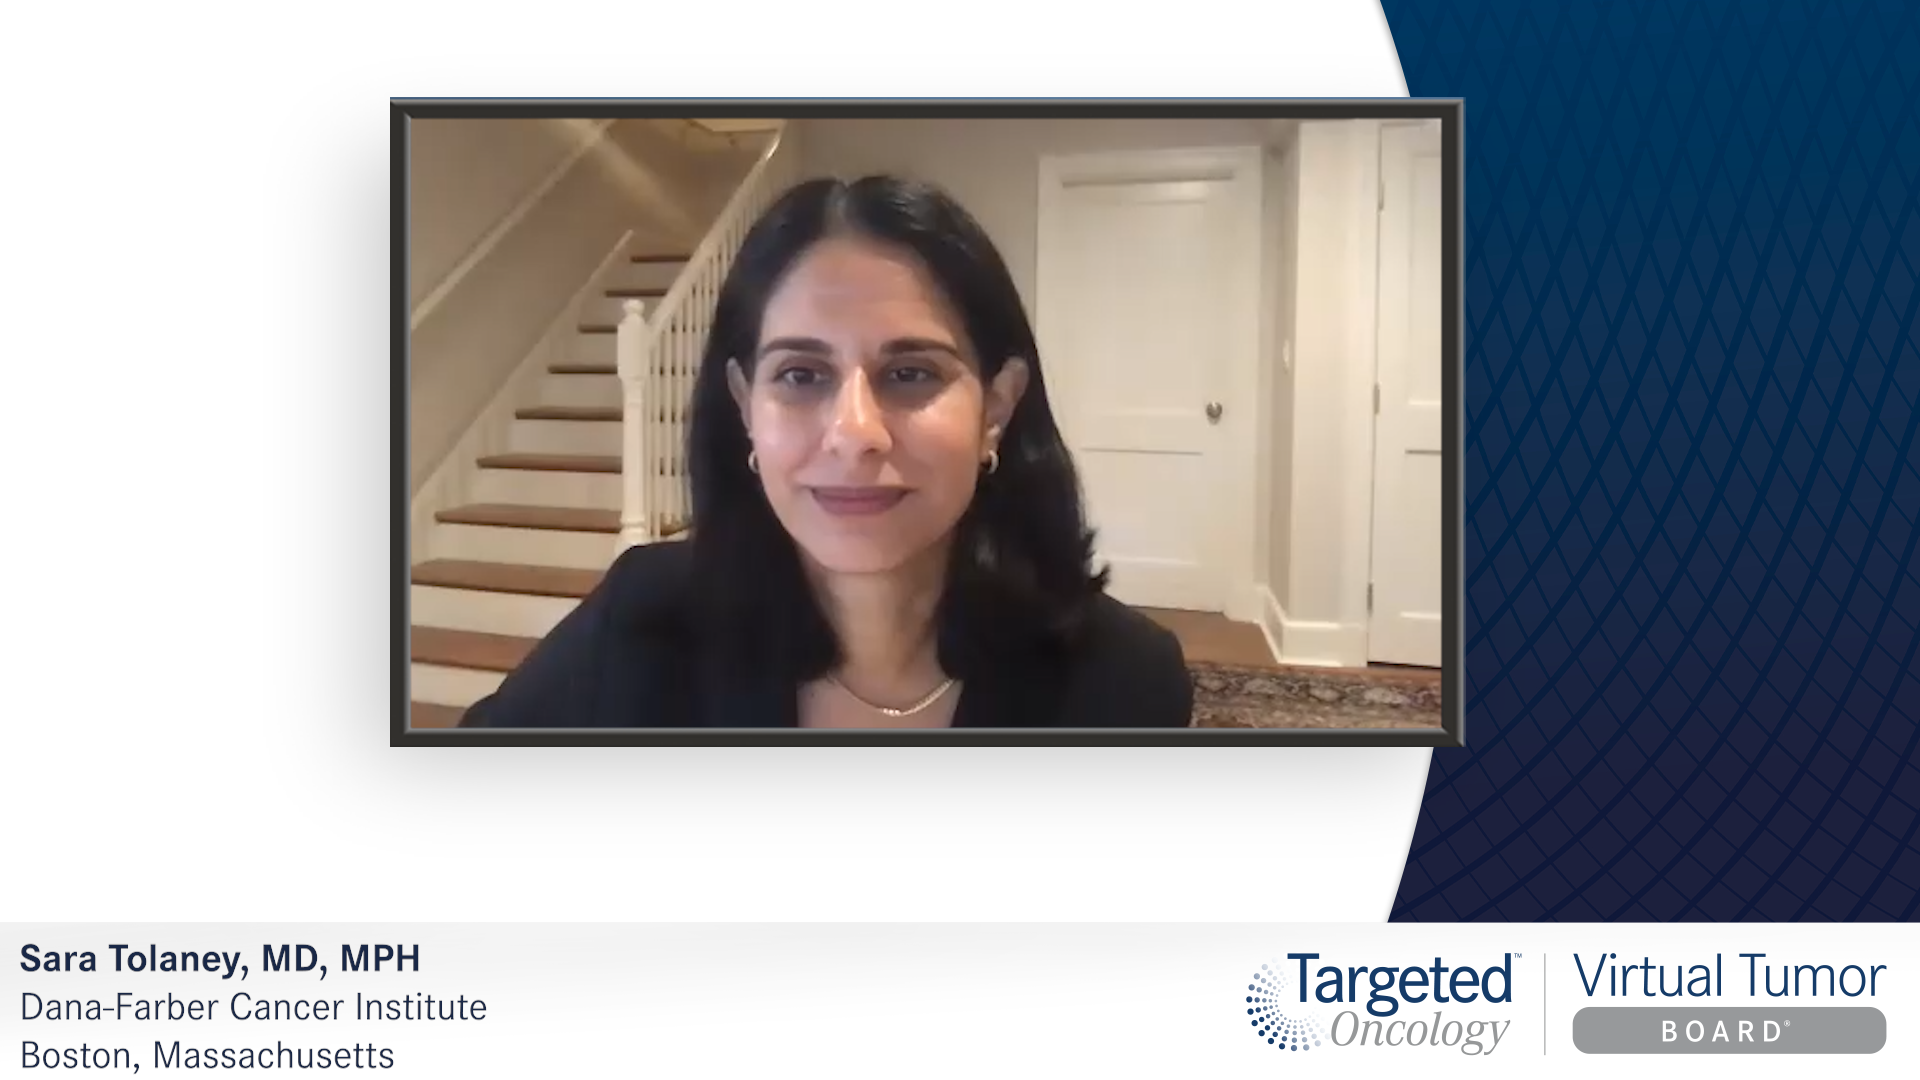 Case 1: Neoadjuvant Therapy for Early-Stage HER2+ Breast Cancer